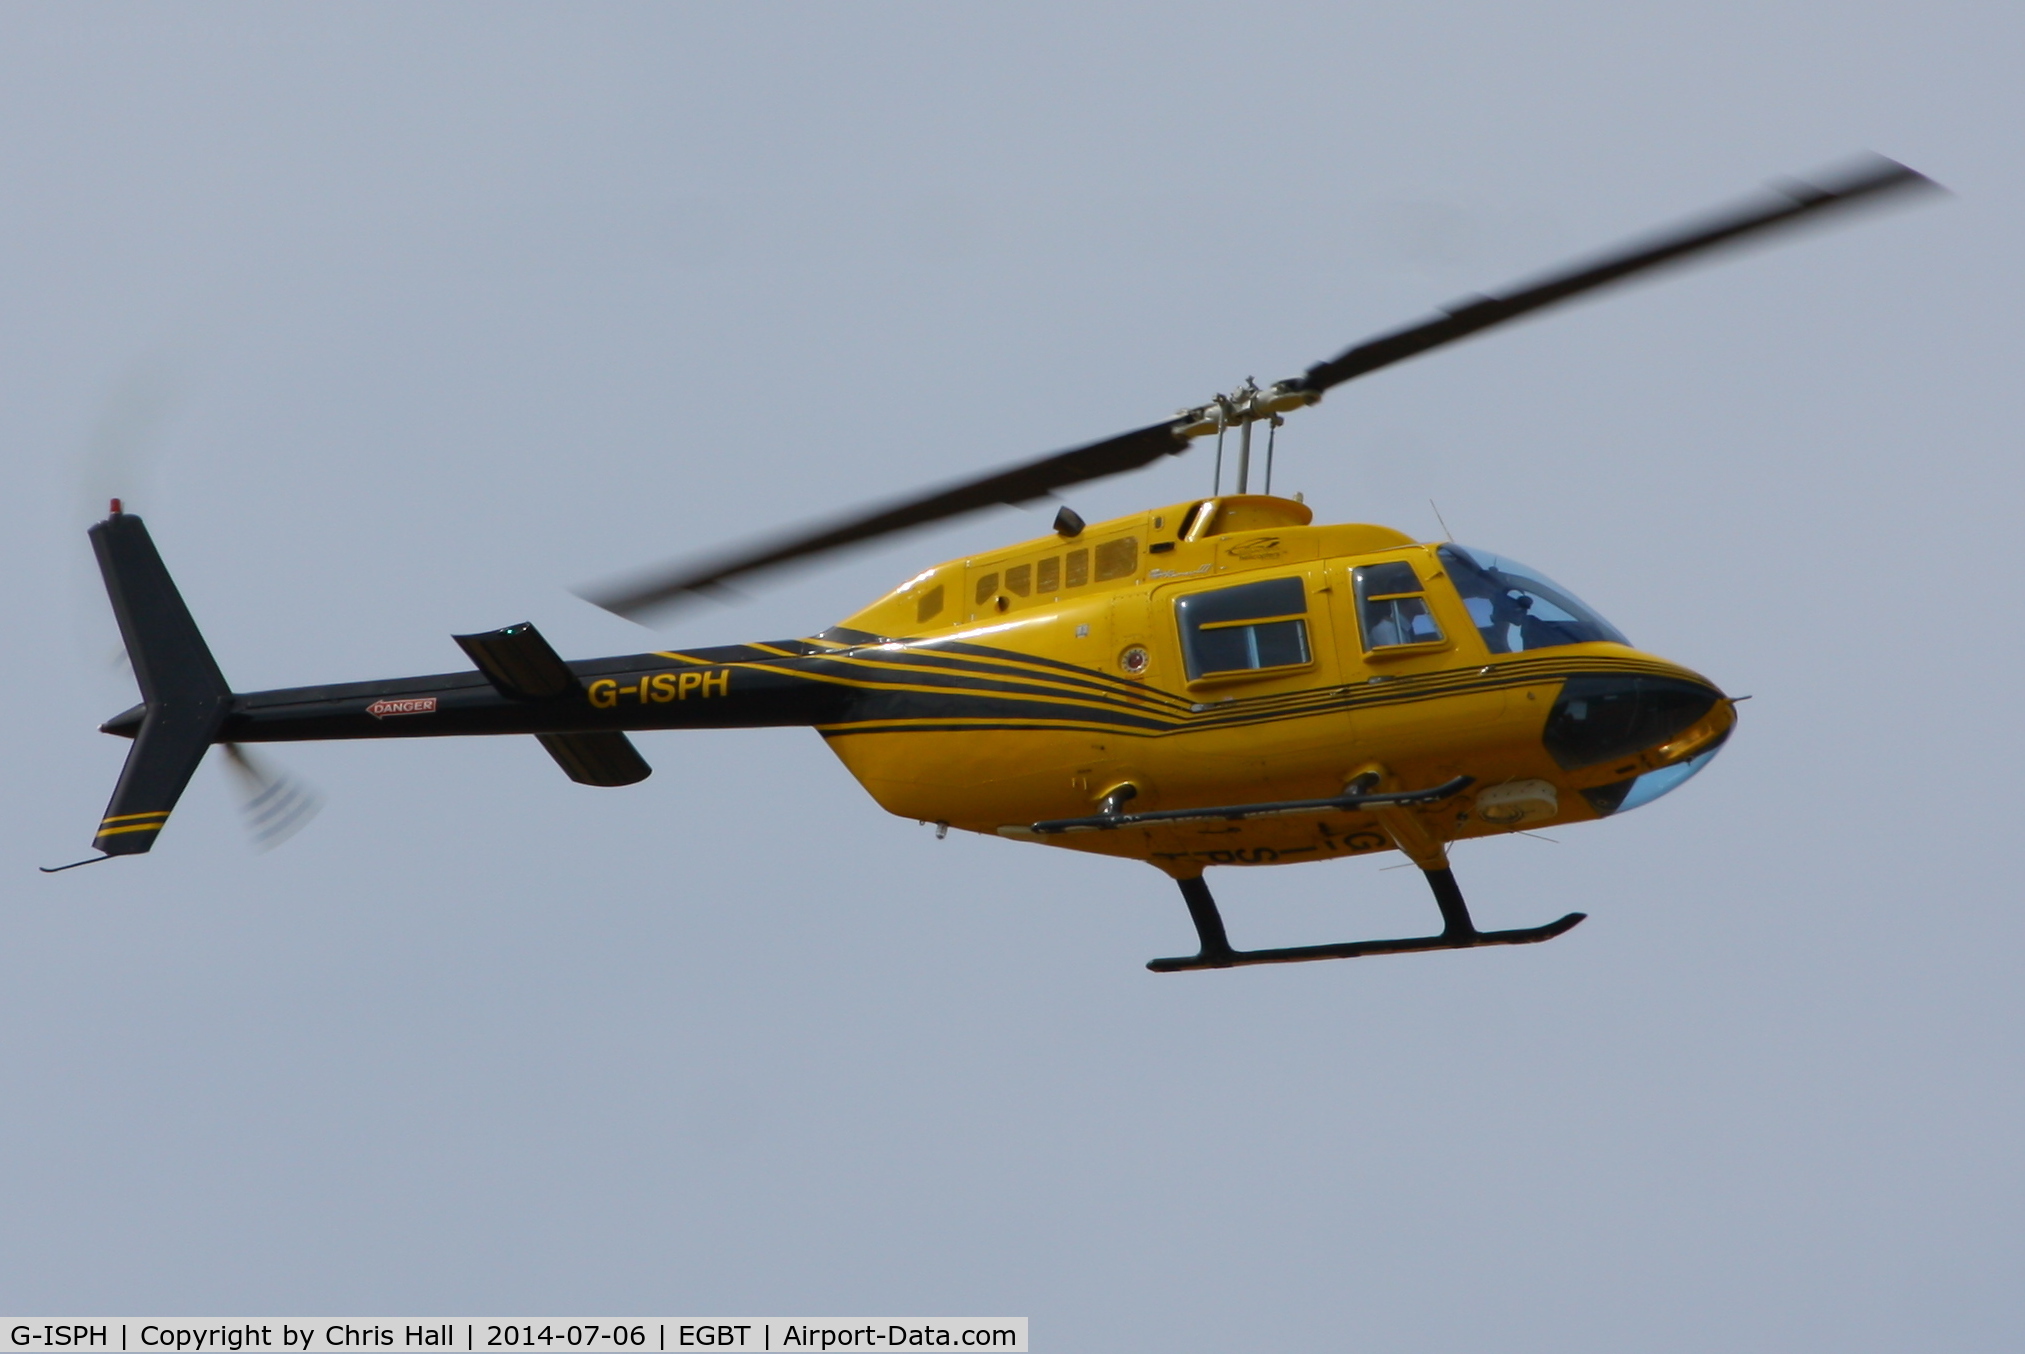 G-ISPH, 1992 Bell 206B JetRanger III C/N 4259, being used for ferrying race fans to the British F1 Grand Prix at Silverstone